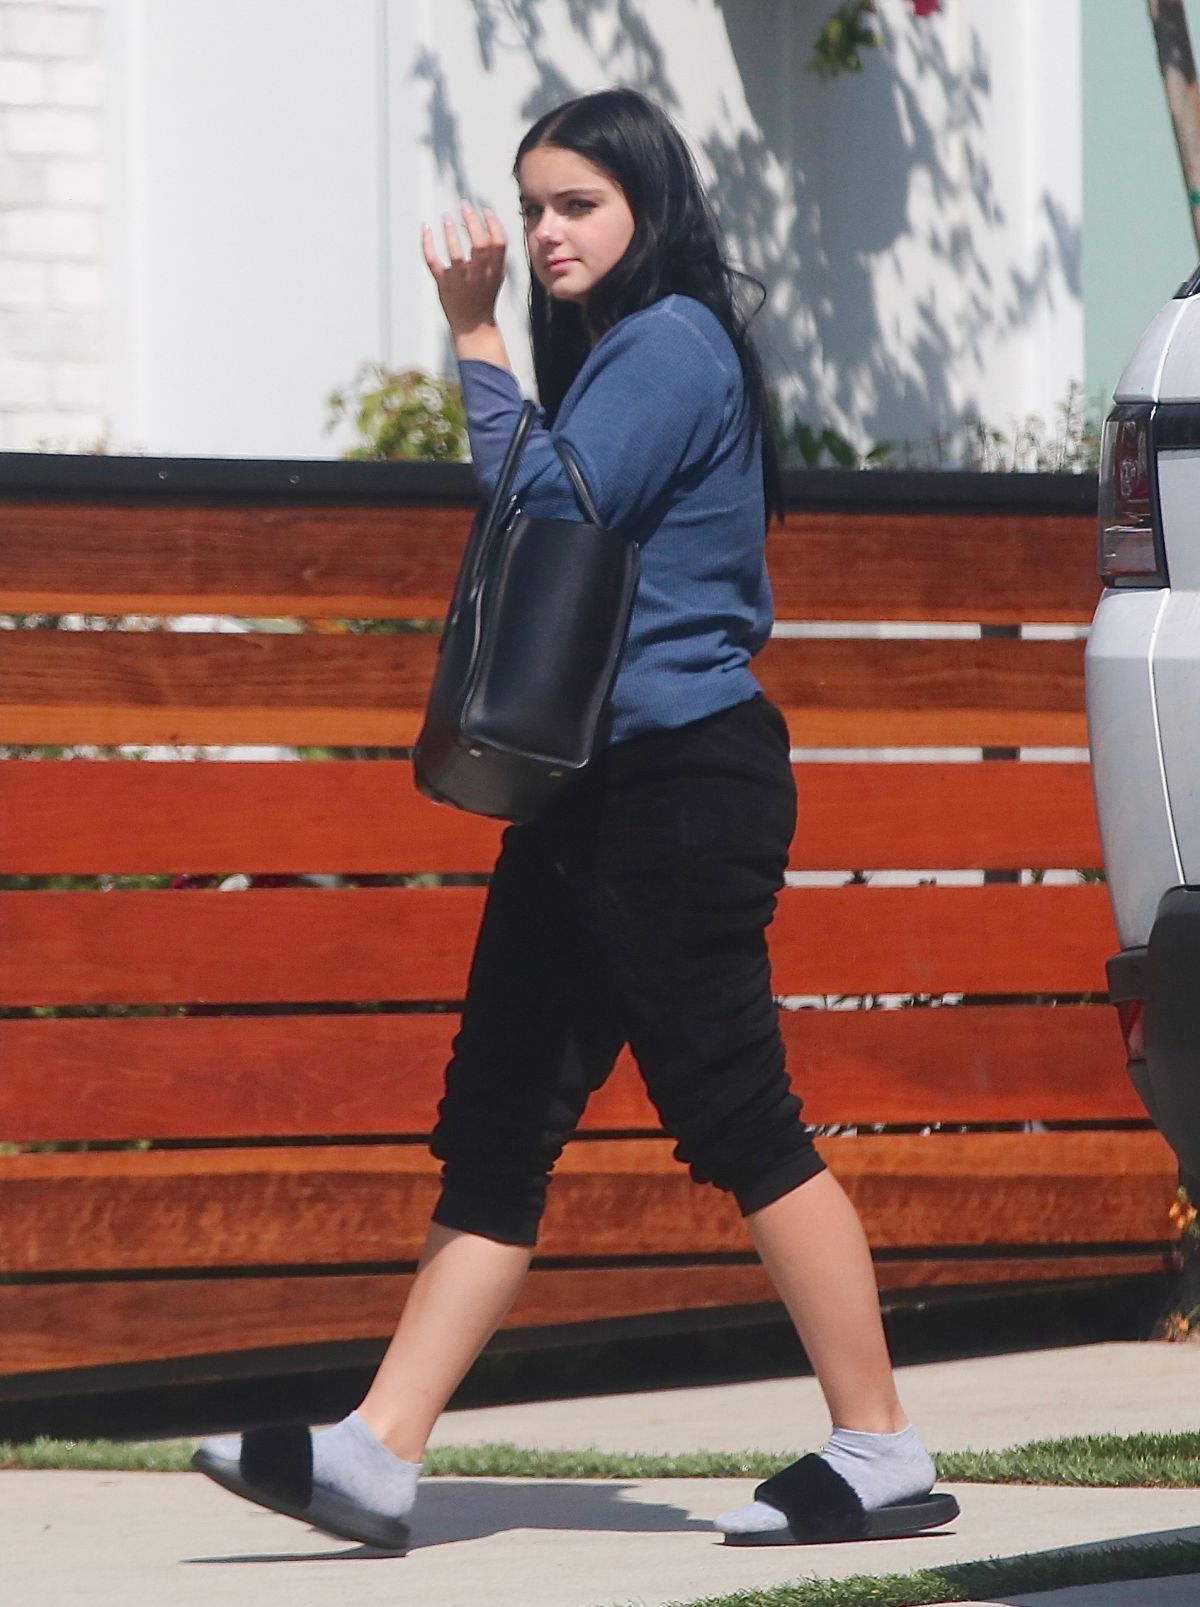 ariel-winter-out-and-about-in-los-angeles-09-20-2017-0.jpg